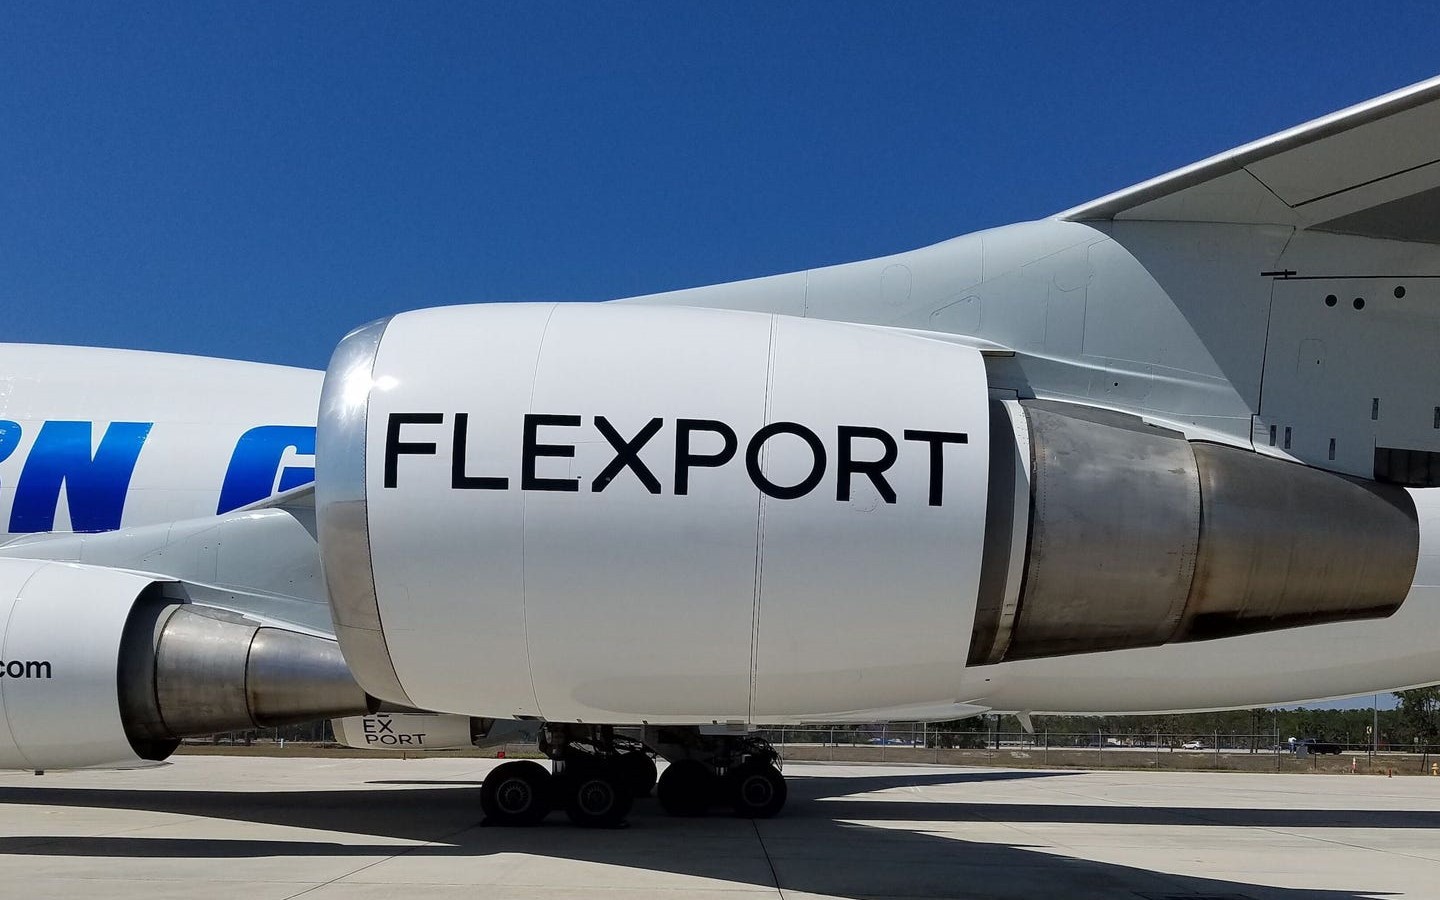 Silicon Valley supply chain company Flexport wants to dethrone Amazon “giant”